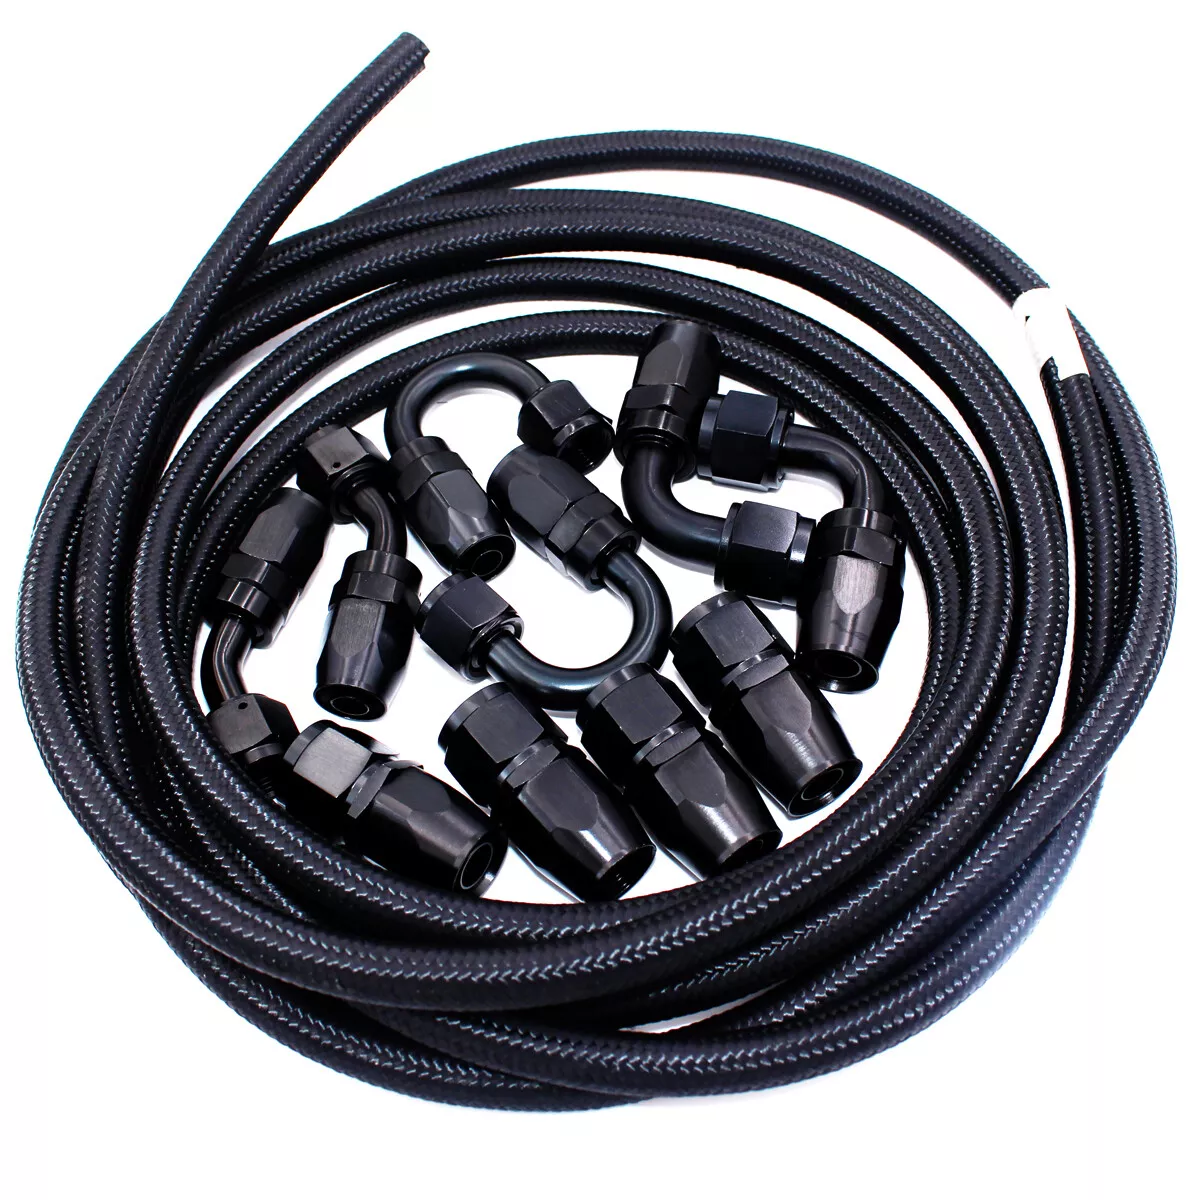 AN6 -6AN Fitting Stainless Steel Nylon Braided Oil Fuel Hose Line 5 Meters  Kit